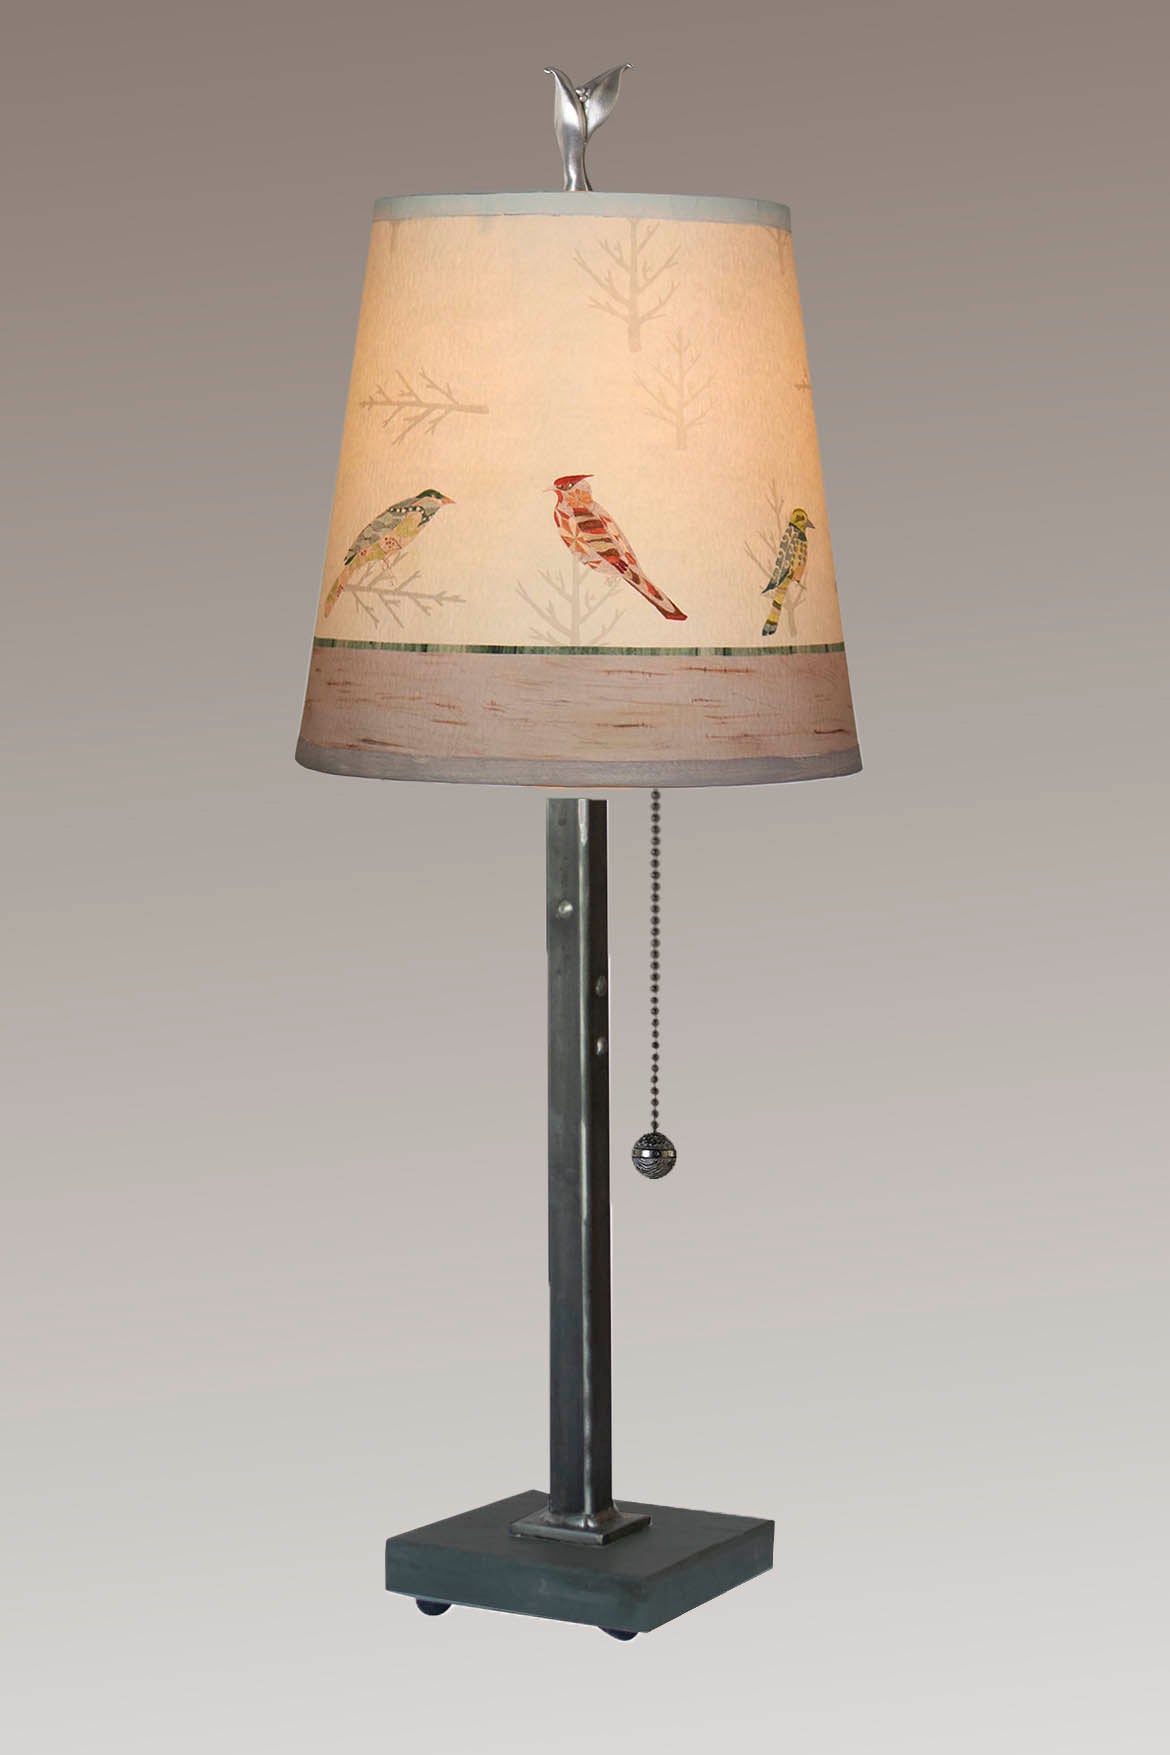 Janna Ugone & Co Table Lamp Steel Table Lamp with Small Drum Shade in Bird Friends